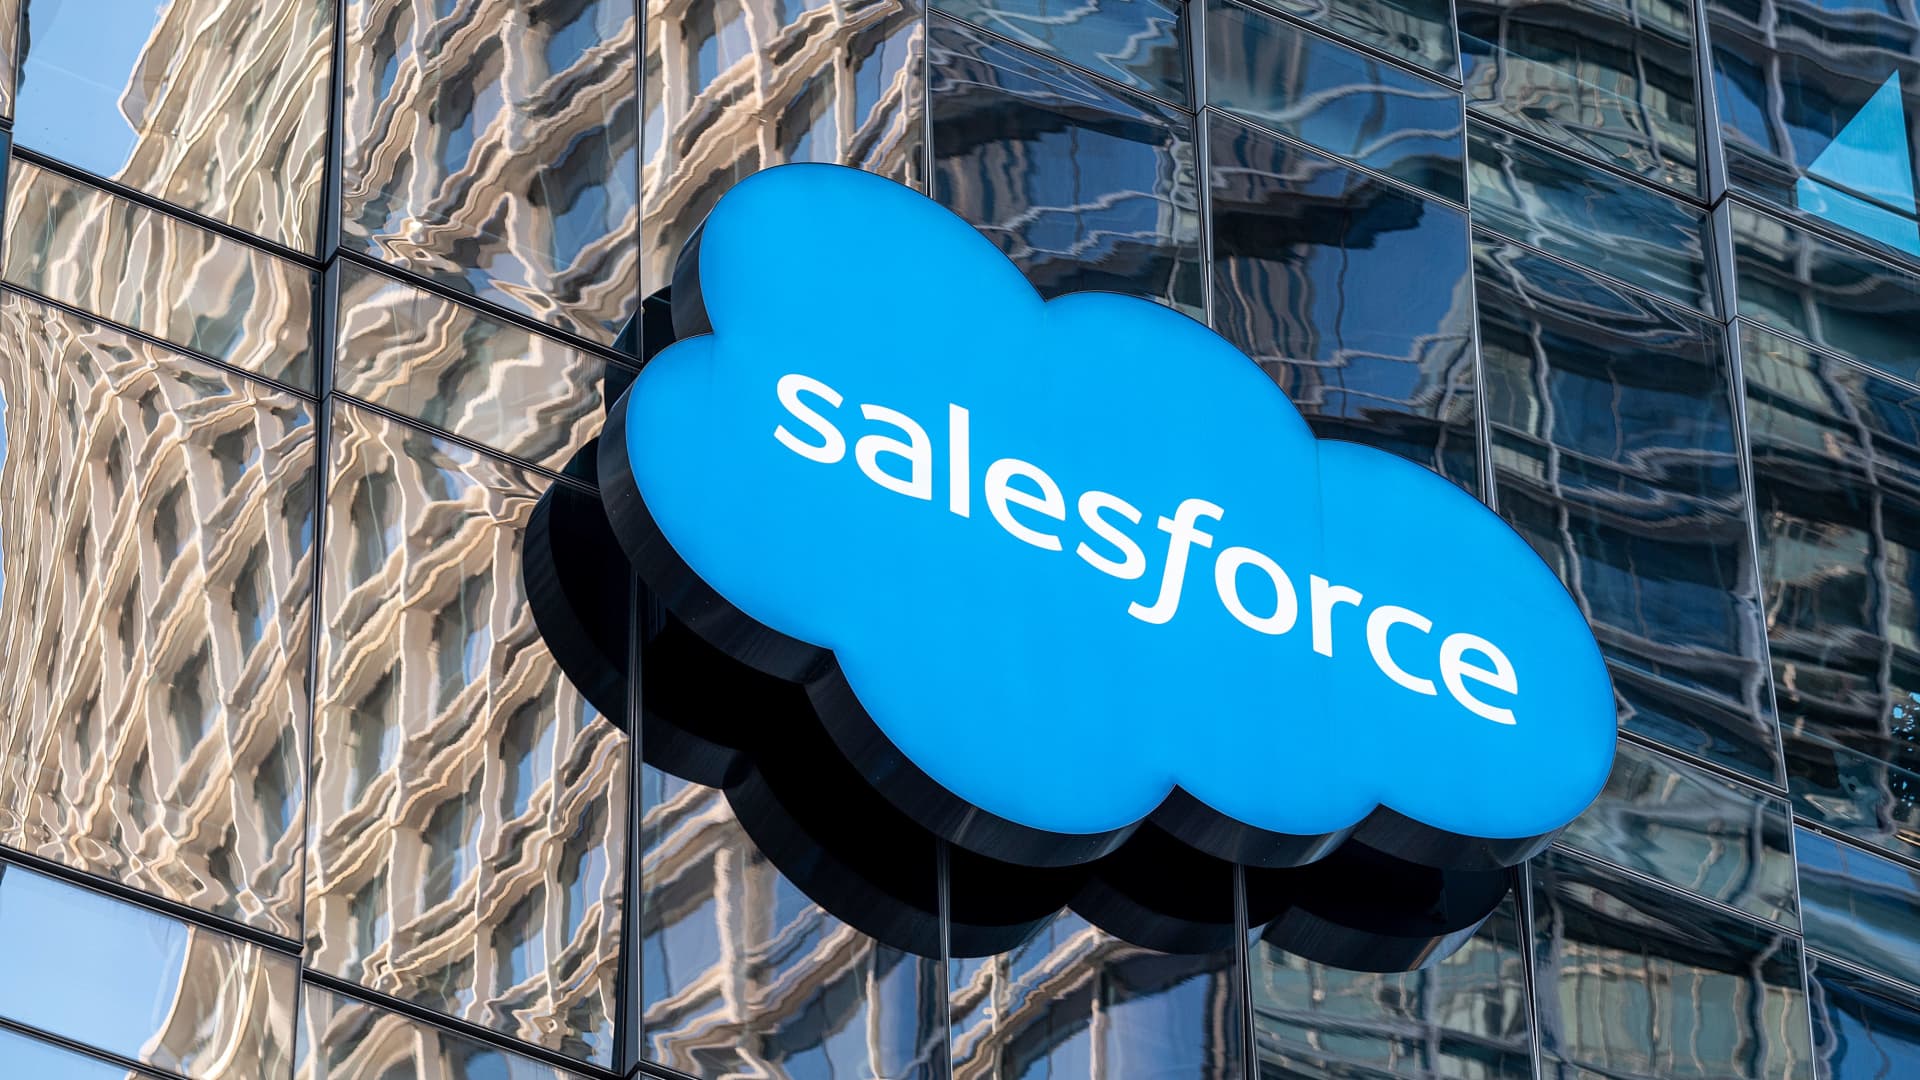 We lower our price target for Salesforce after disappointing guidance